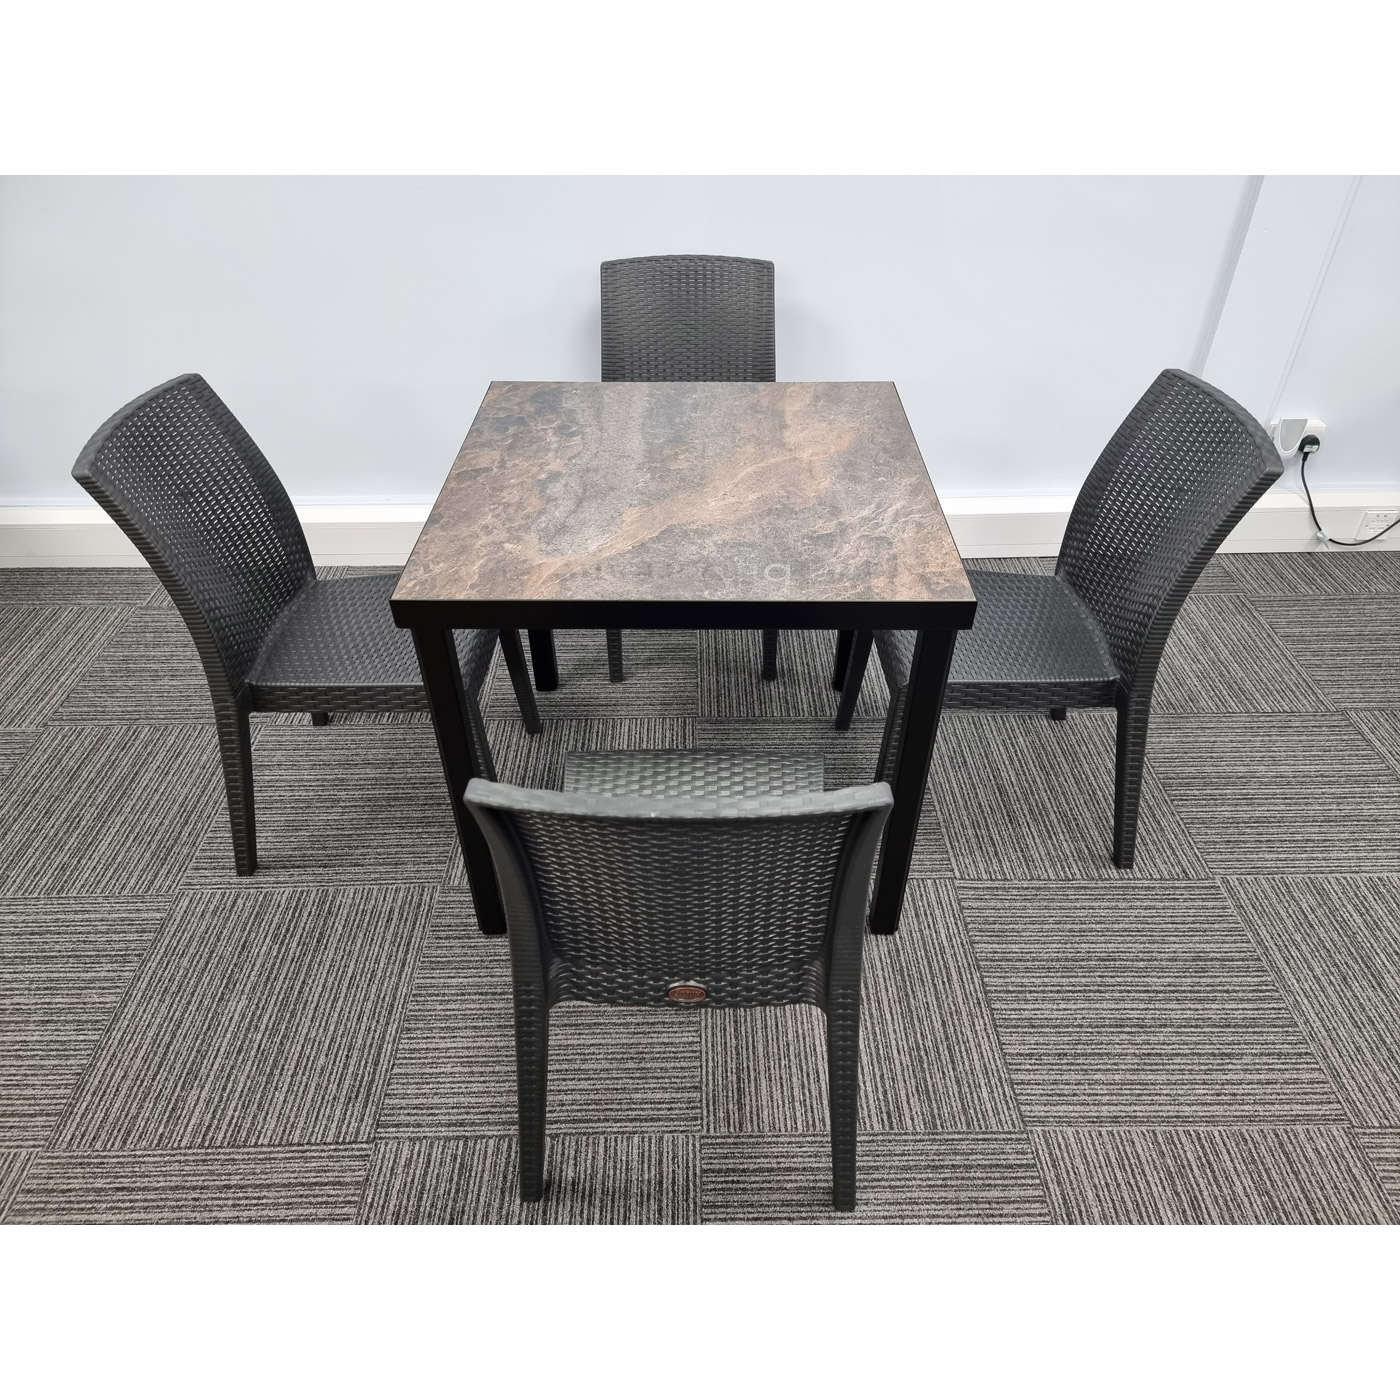 Urban Rust table with 4 Richmond Dining Chairs | Tabilo